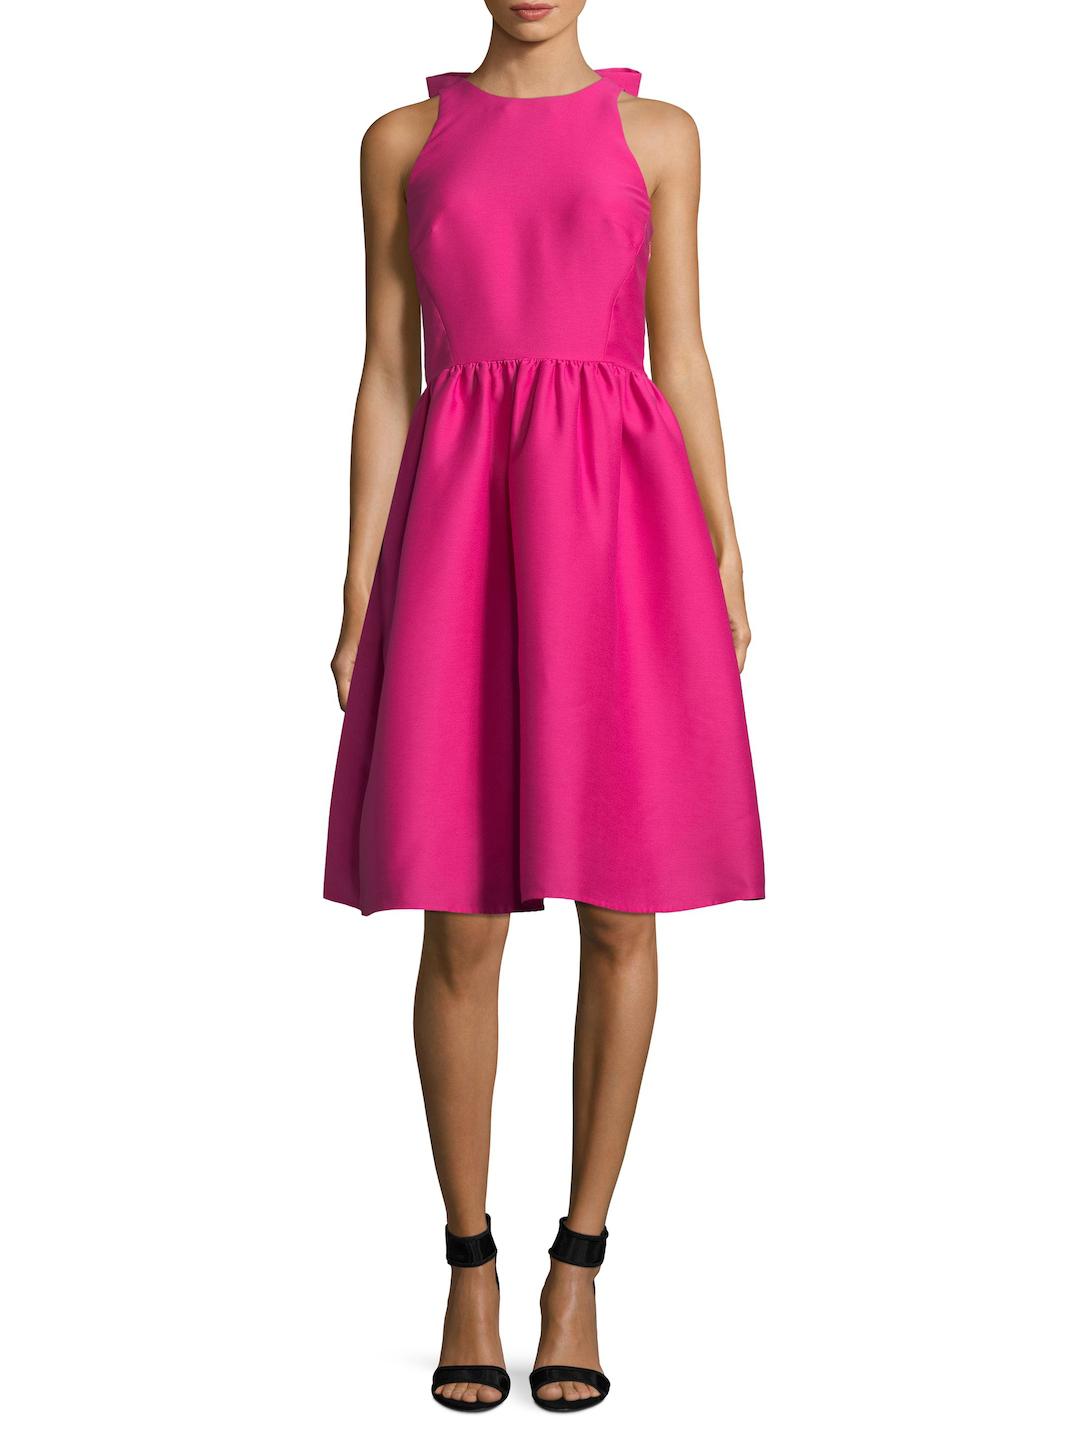 Kate Spade Bow Back Fit And Flare Dress in Pink